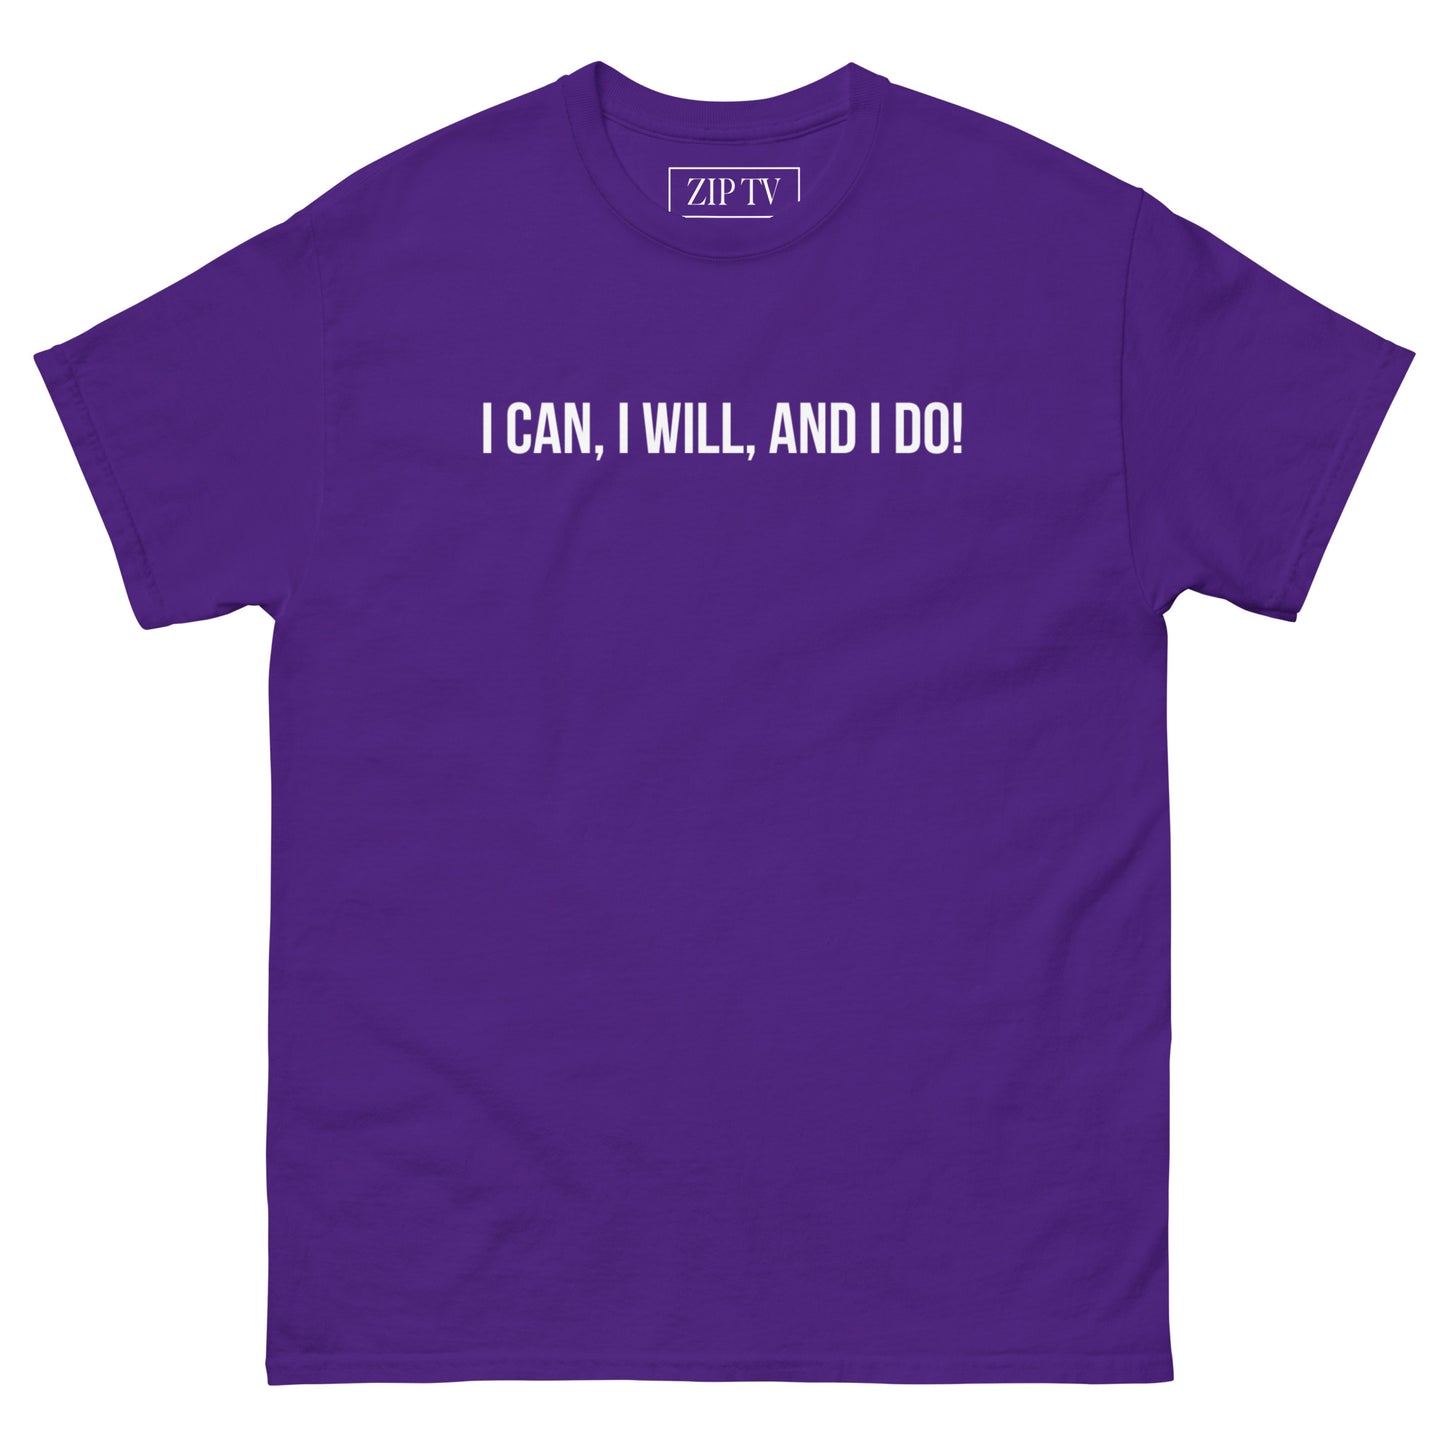 I CAN, I WILL, AND I DO - Classic Tee